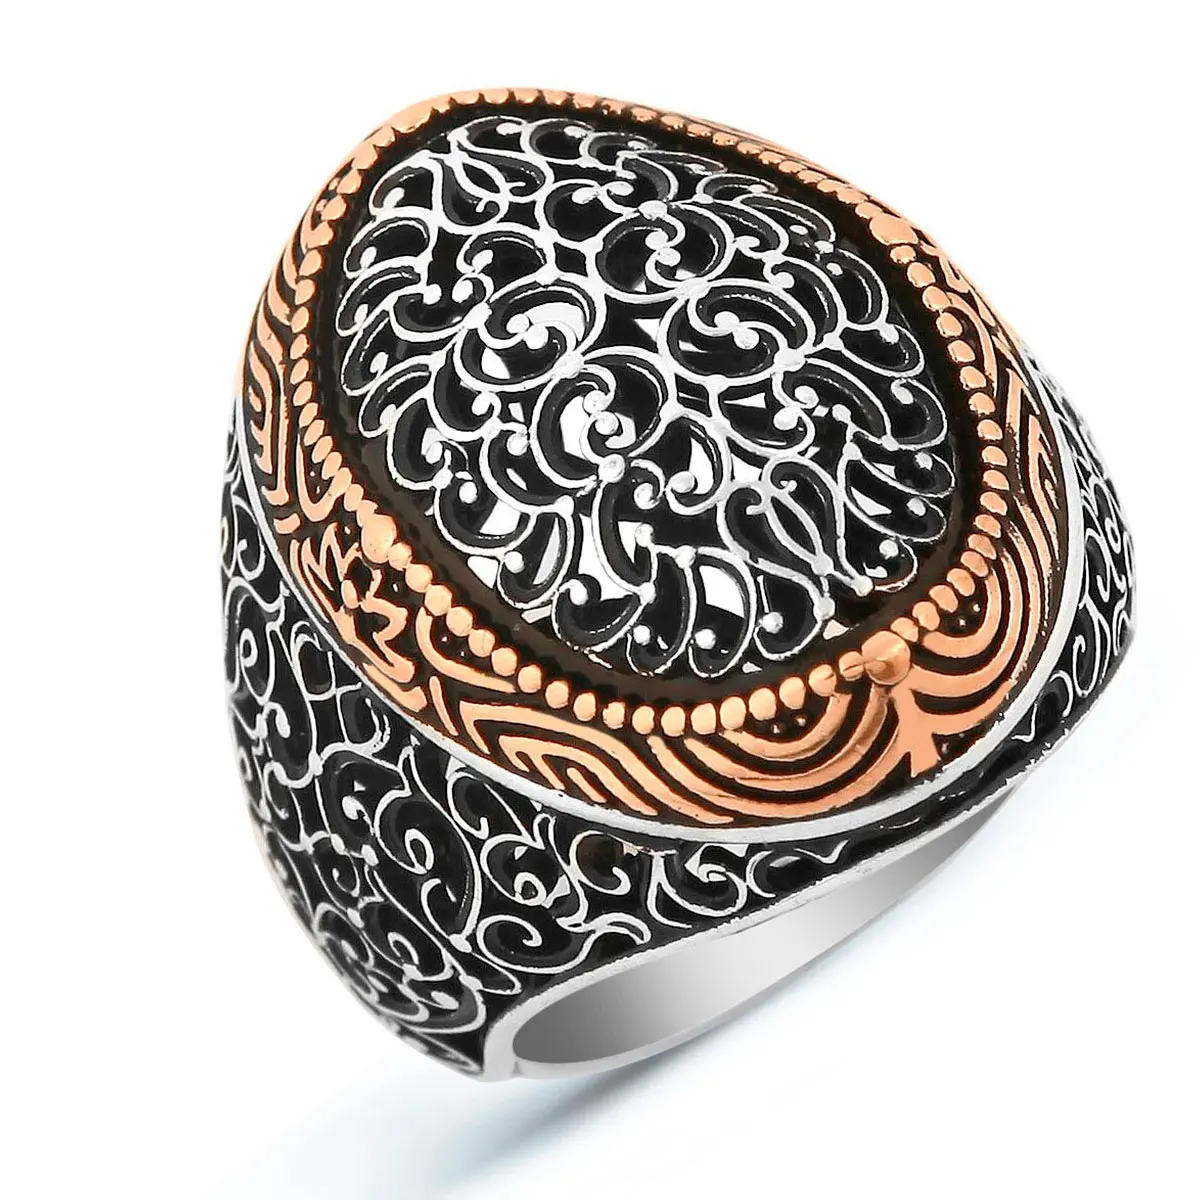 925 Sterling Silver Ring Pure For Men Unique Design Patterned Stamped 8 Variations High Quality Turkish Jewelry